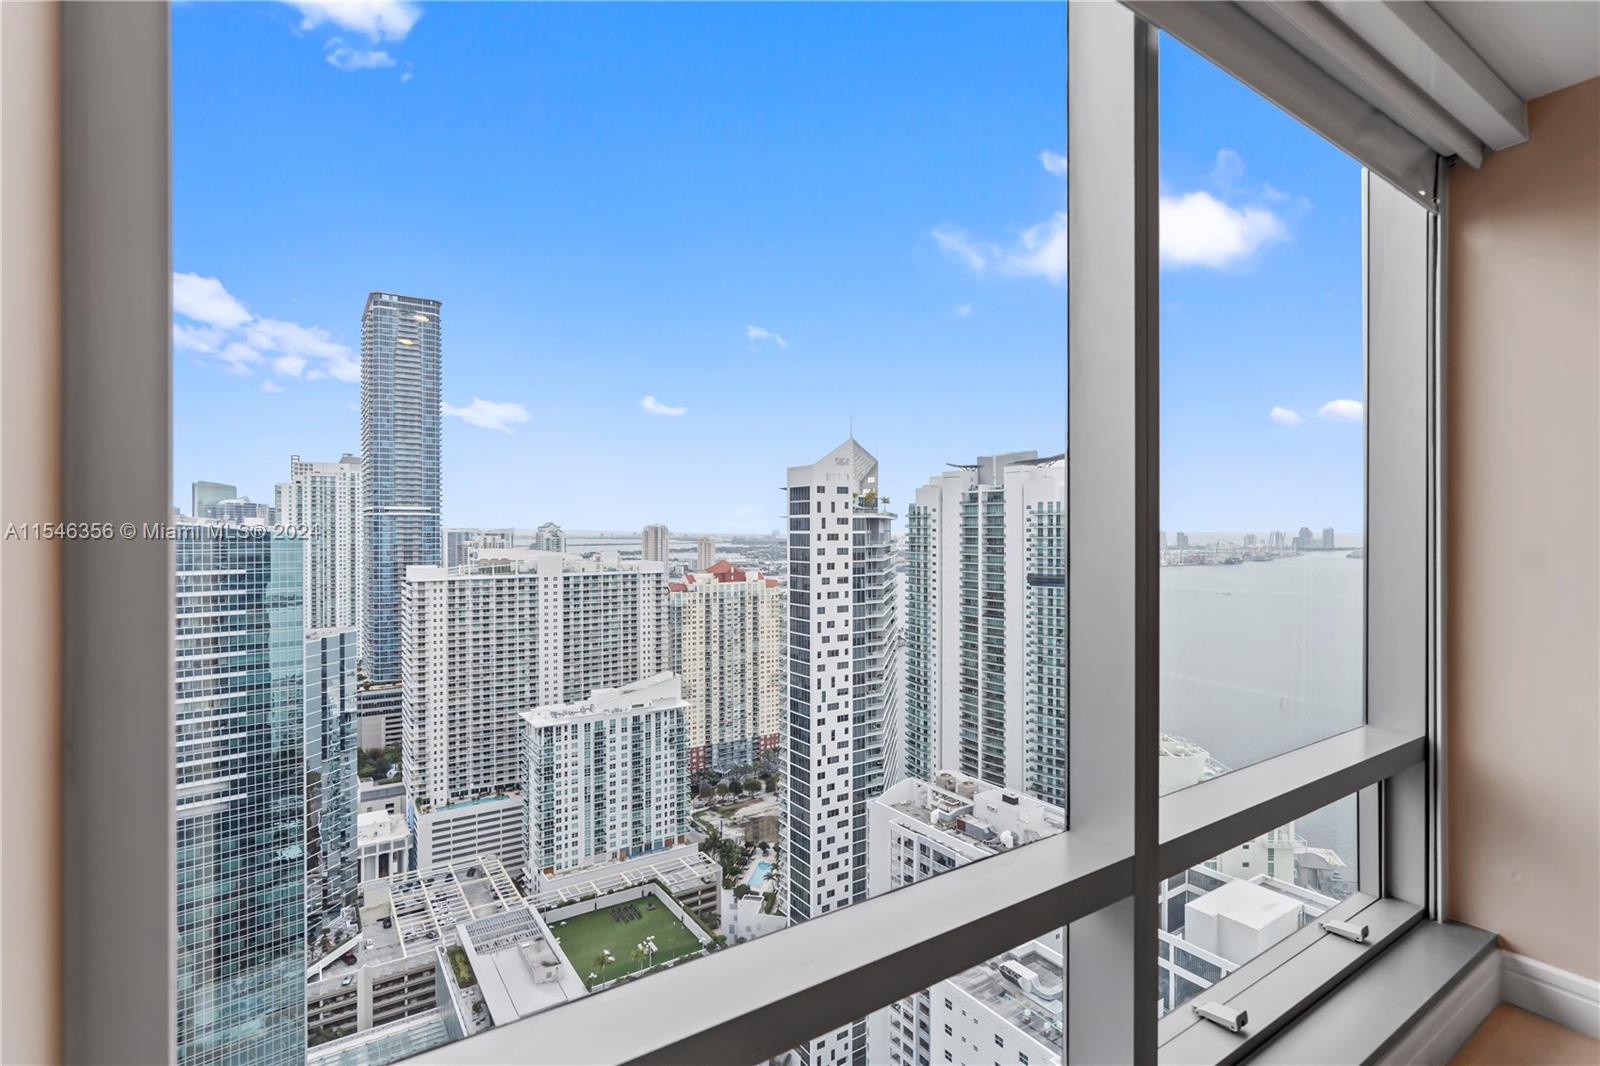 1425  Brickell Ave #44D For Sale A11546356, FL